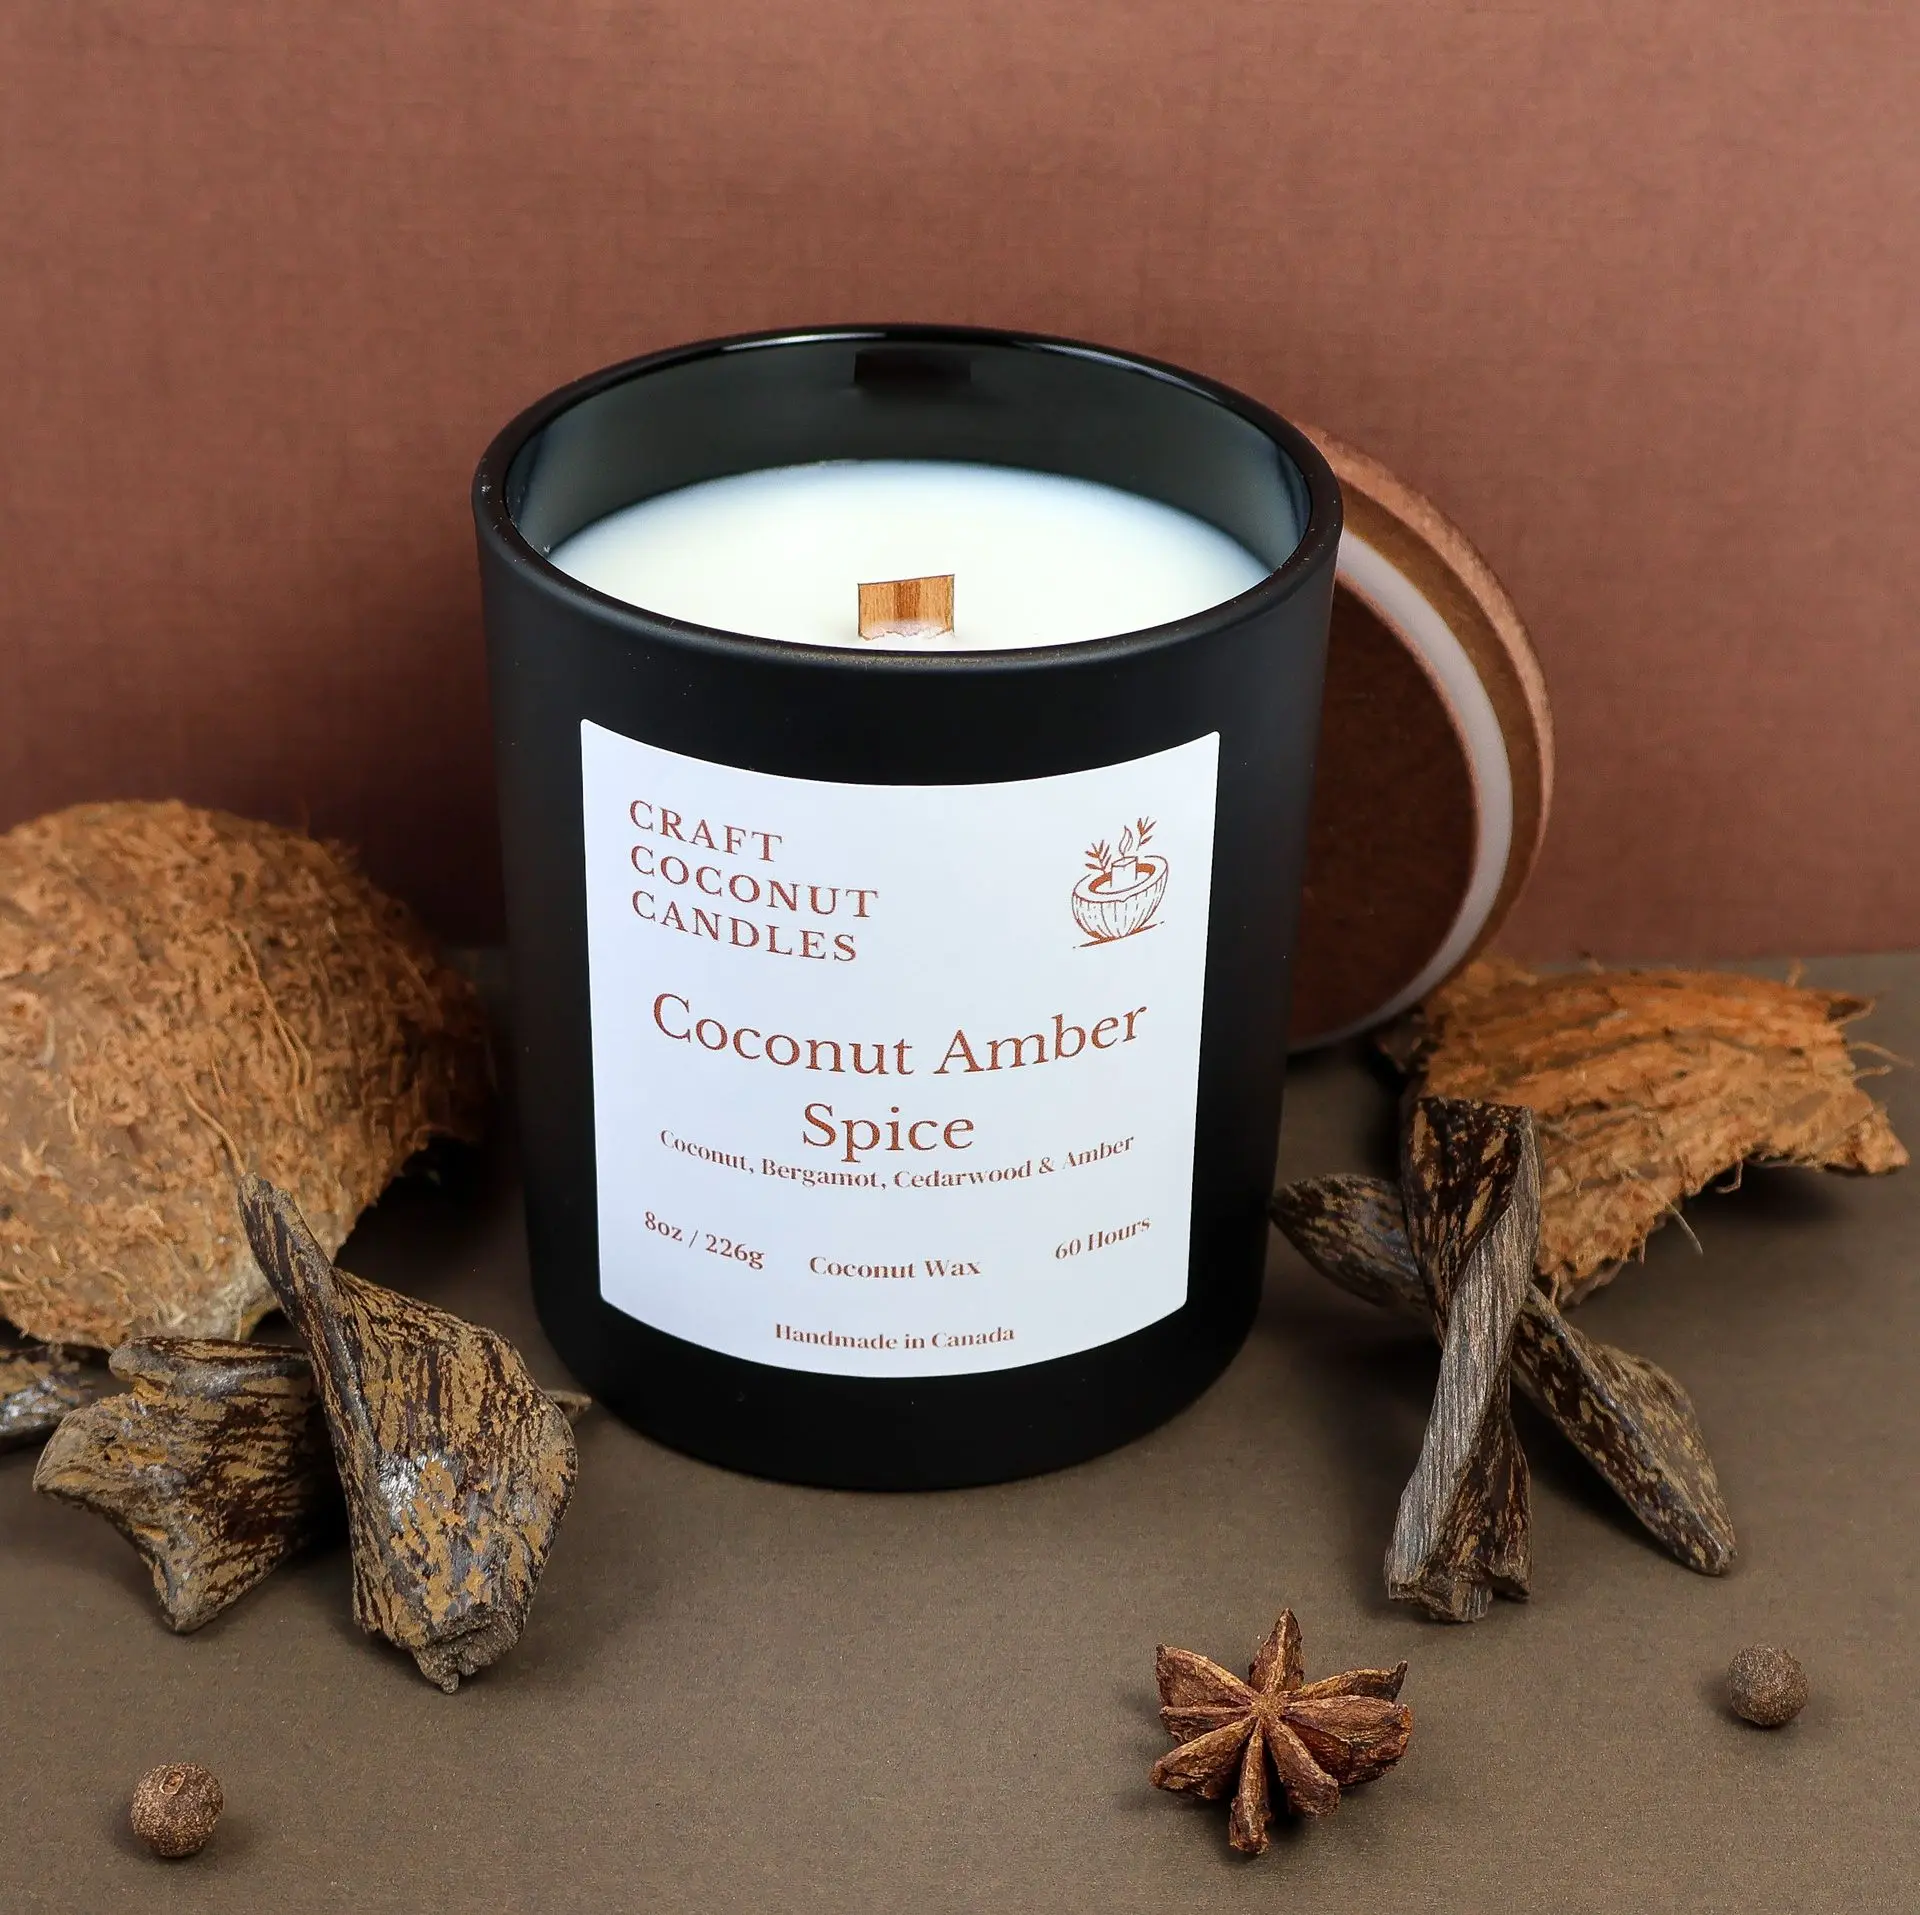 coconut amber spice scented candle